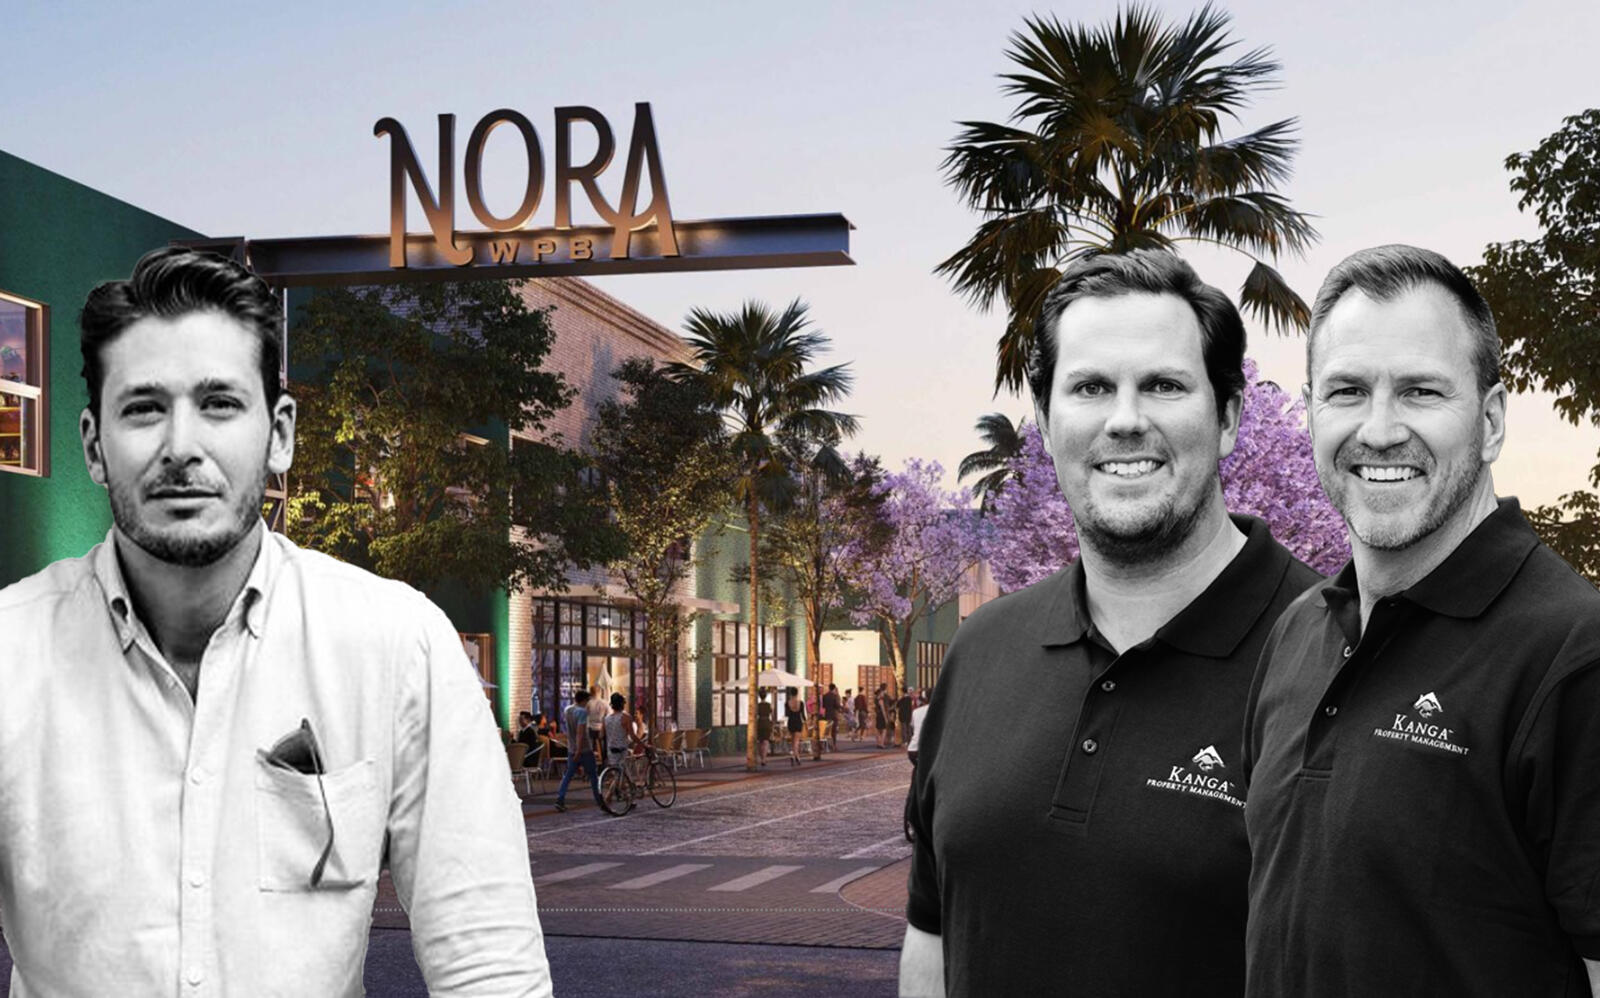 Joe Furst of Place Projects, Ned Grace and Damien Barr of NDT Development and a rendering of the Nora District Redevelopment (ArquitectonicaGEO, Place, Kangra)